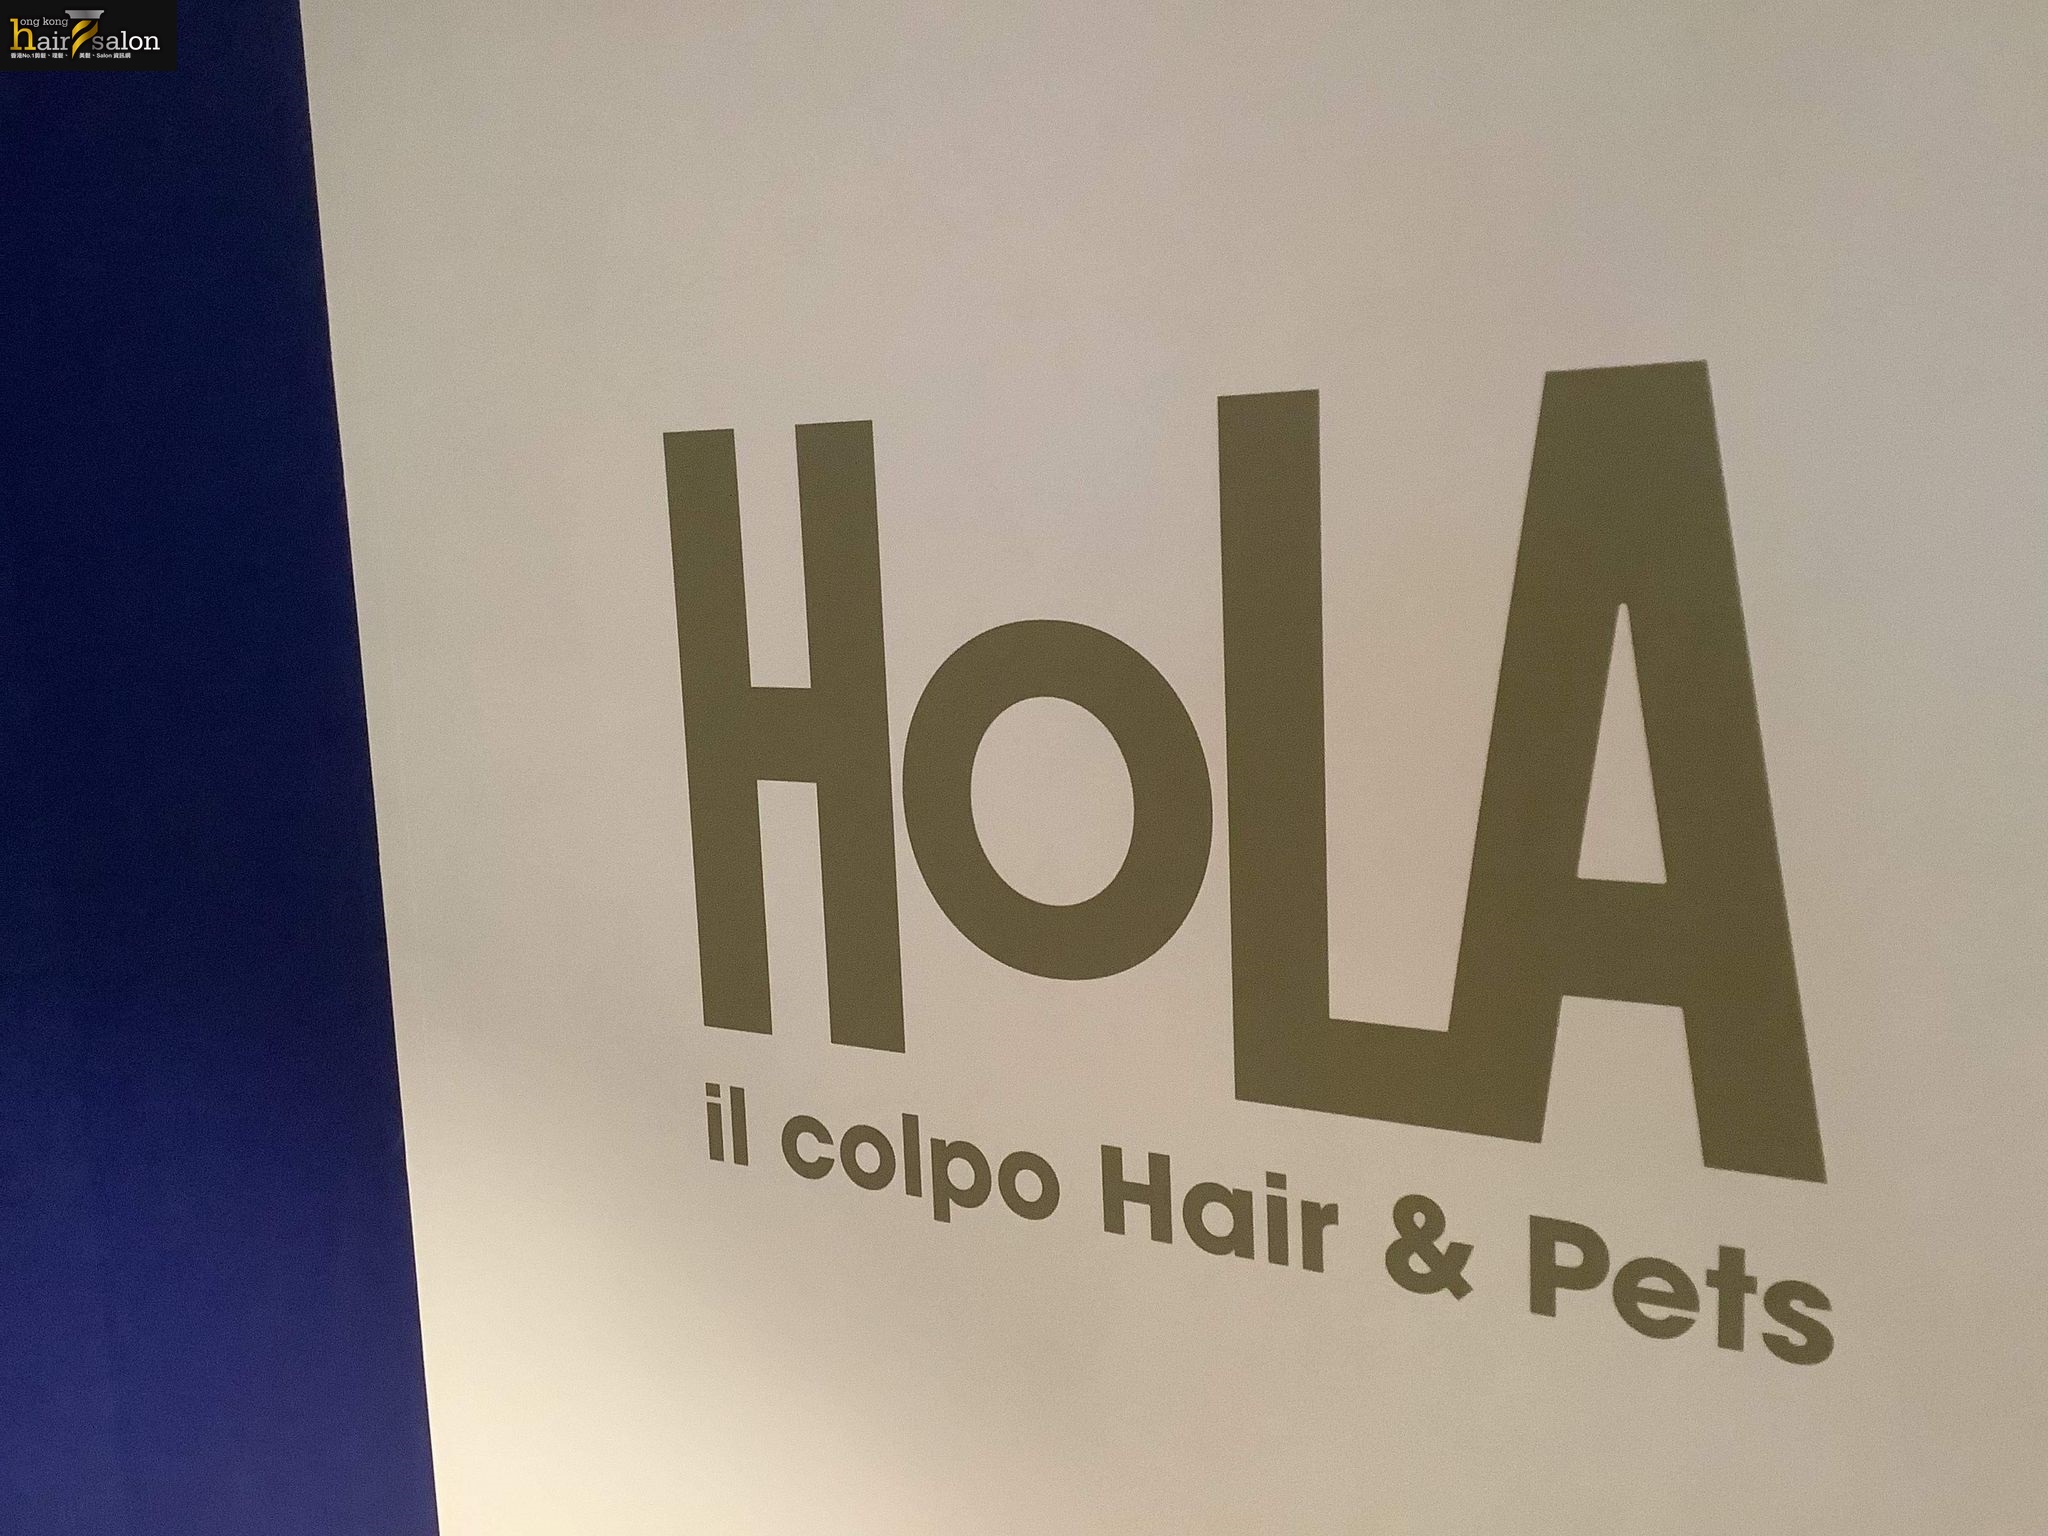 Hair Colouring: Hola il Colpo hairs & pets